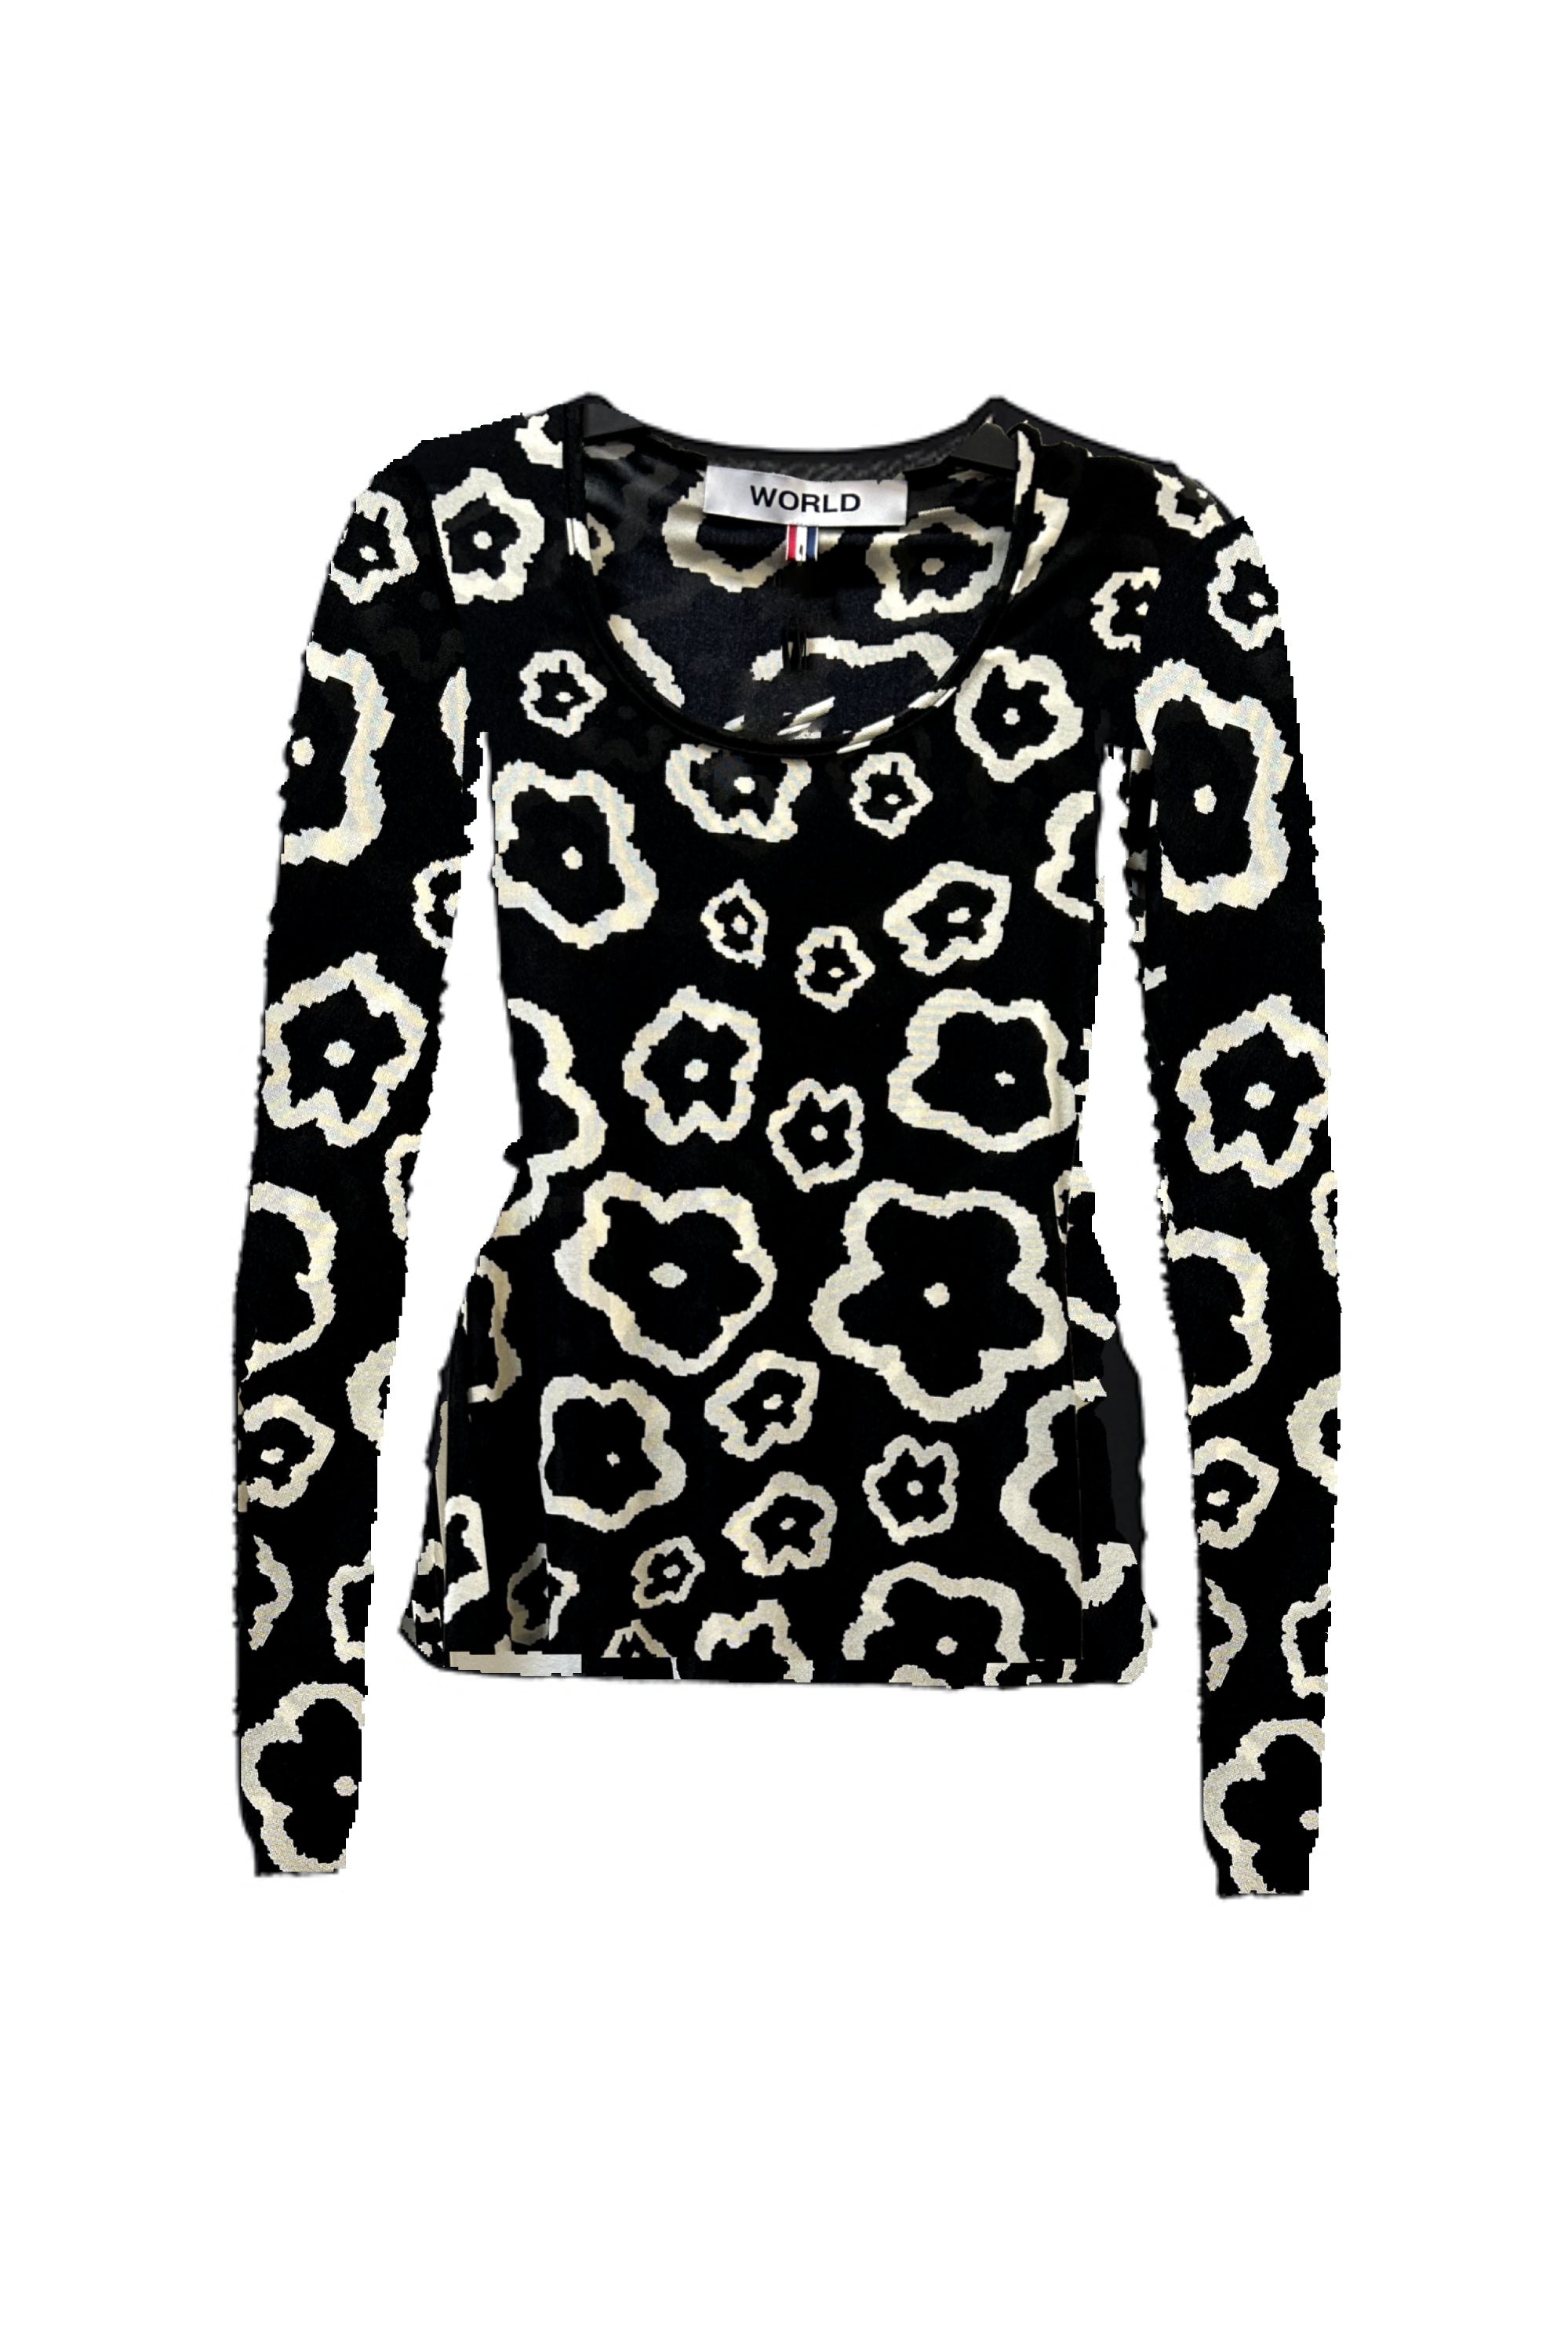 WORLD 5052a Octo Top 2024 Black White Flowers